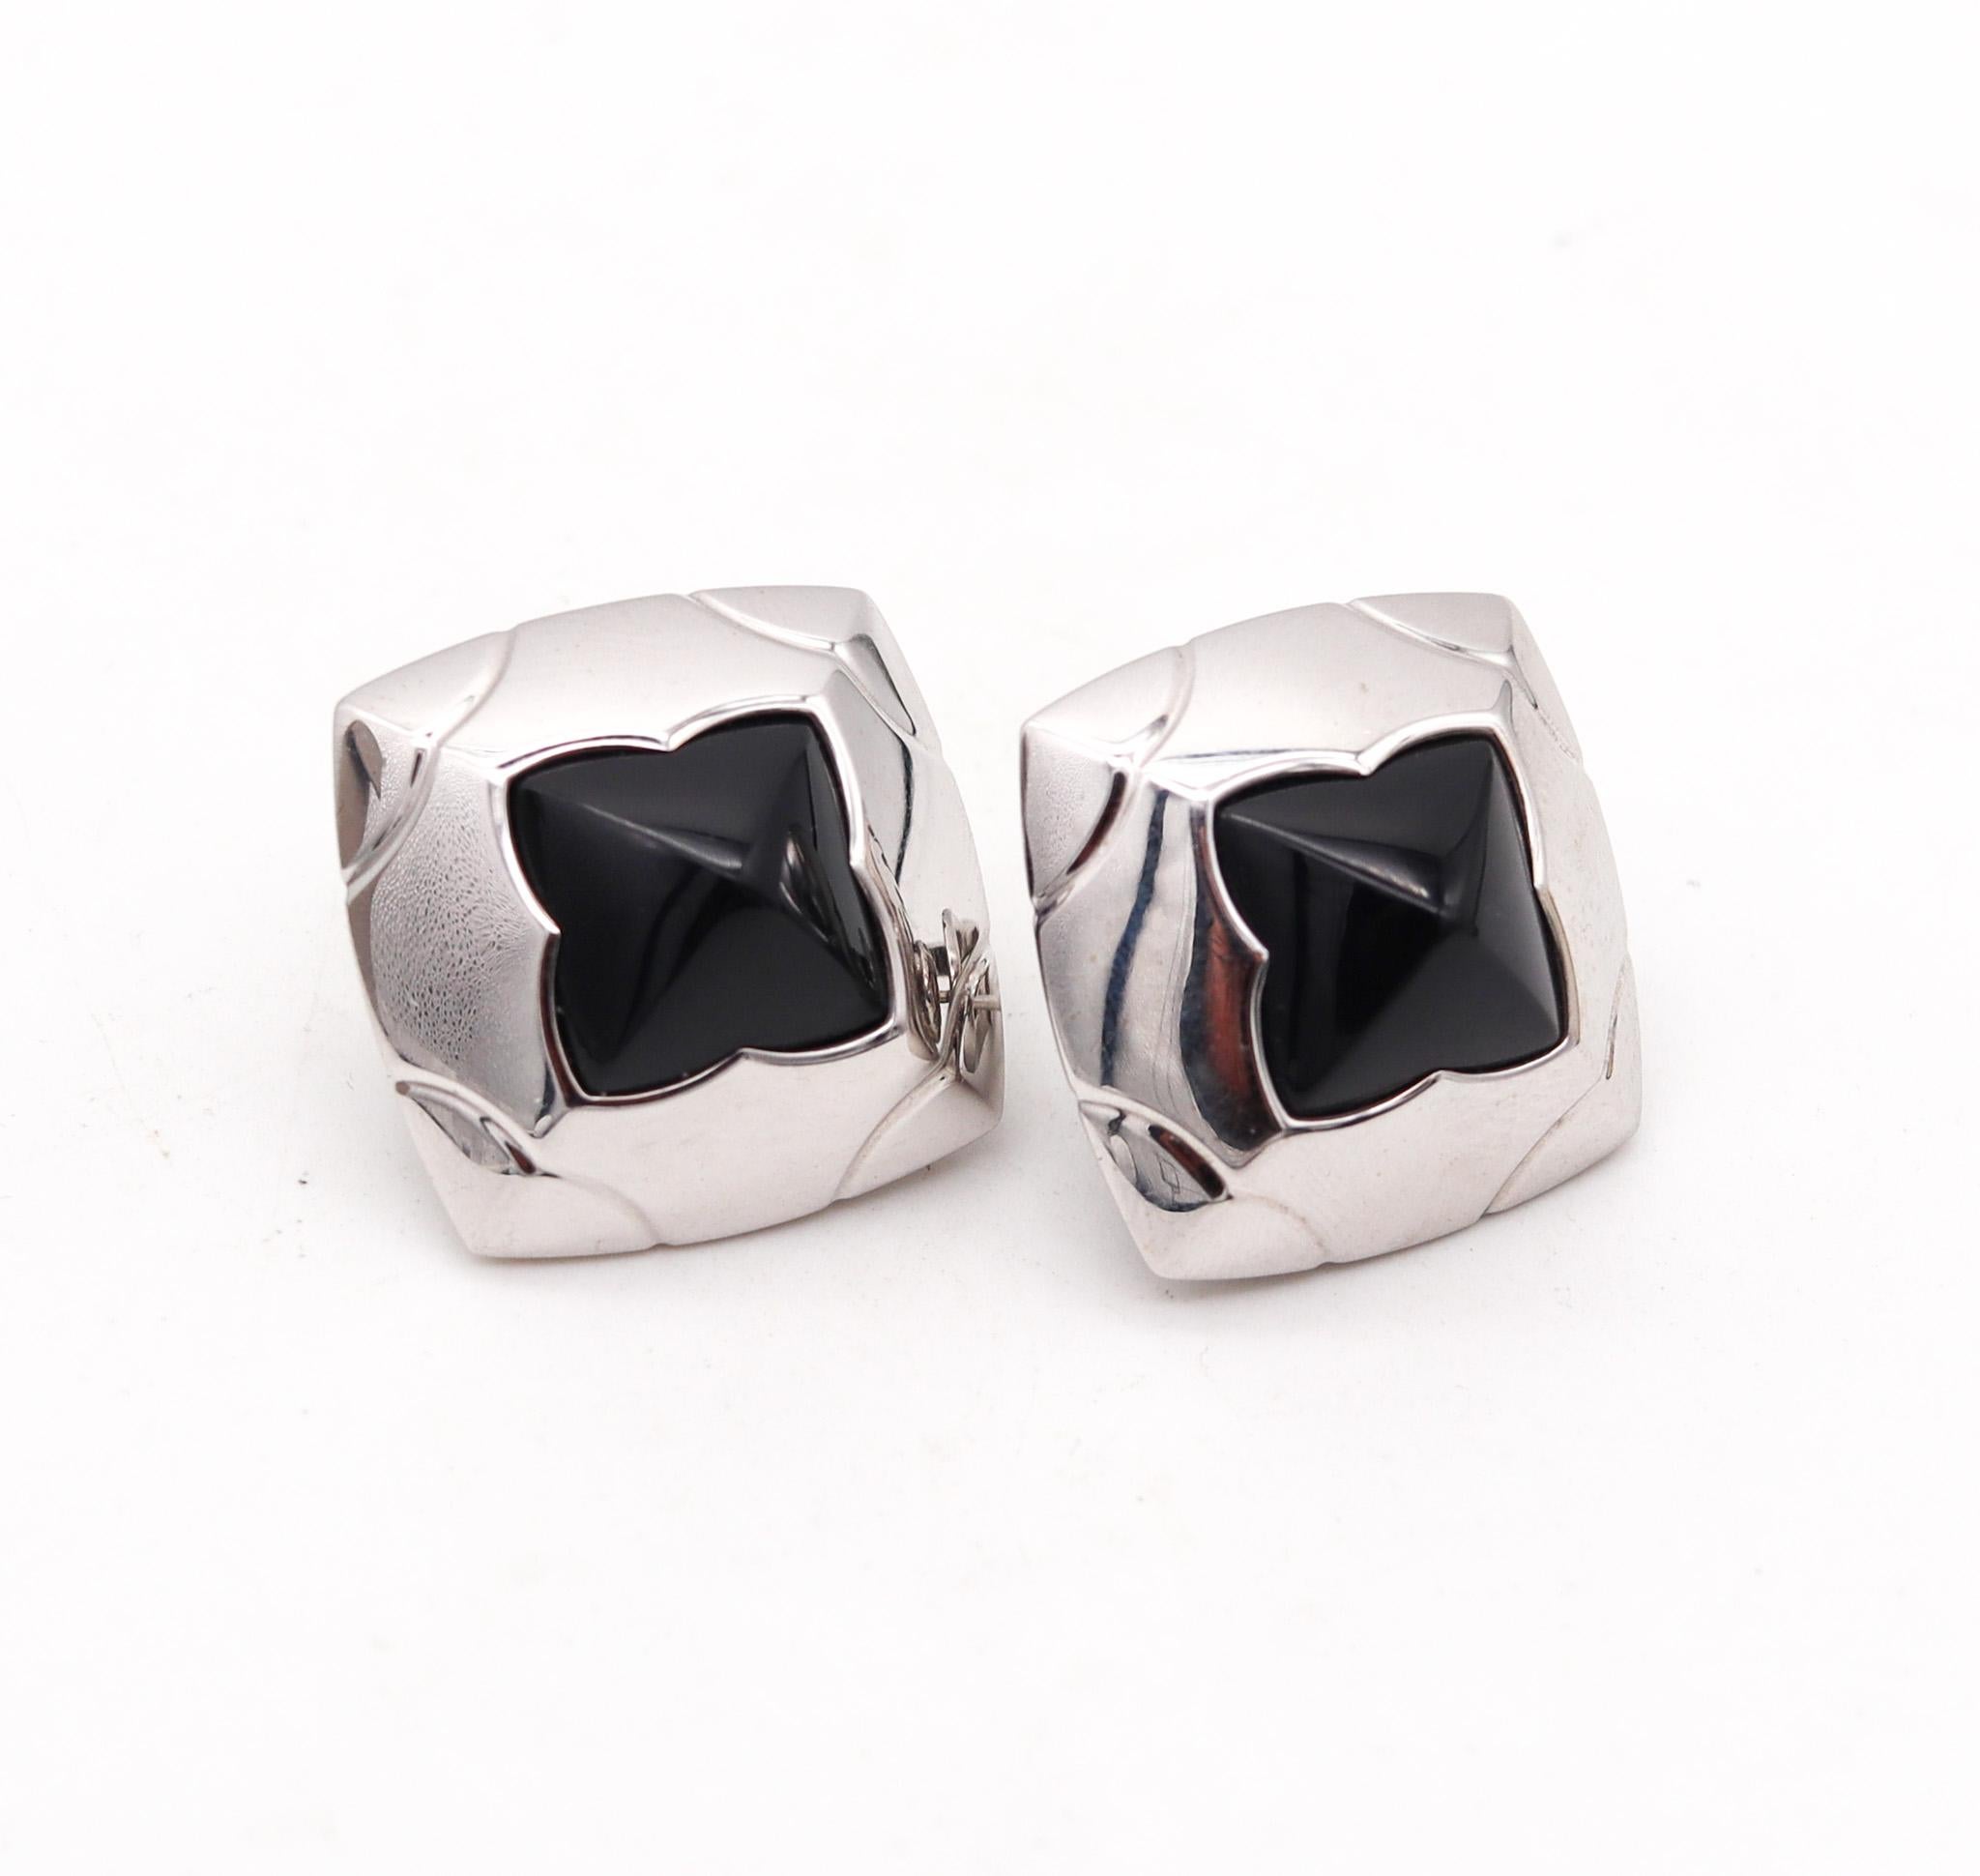 Pair of pyramid earrings designed by Bvlgari.

Actually this is one of the iconic pieces of jewelry, created in Milano Italy by the jewelry house of Bvlgari. These pair of clips earrings are from the Pyramide collection, designed back in the late